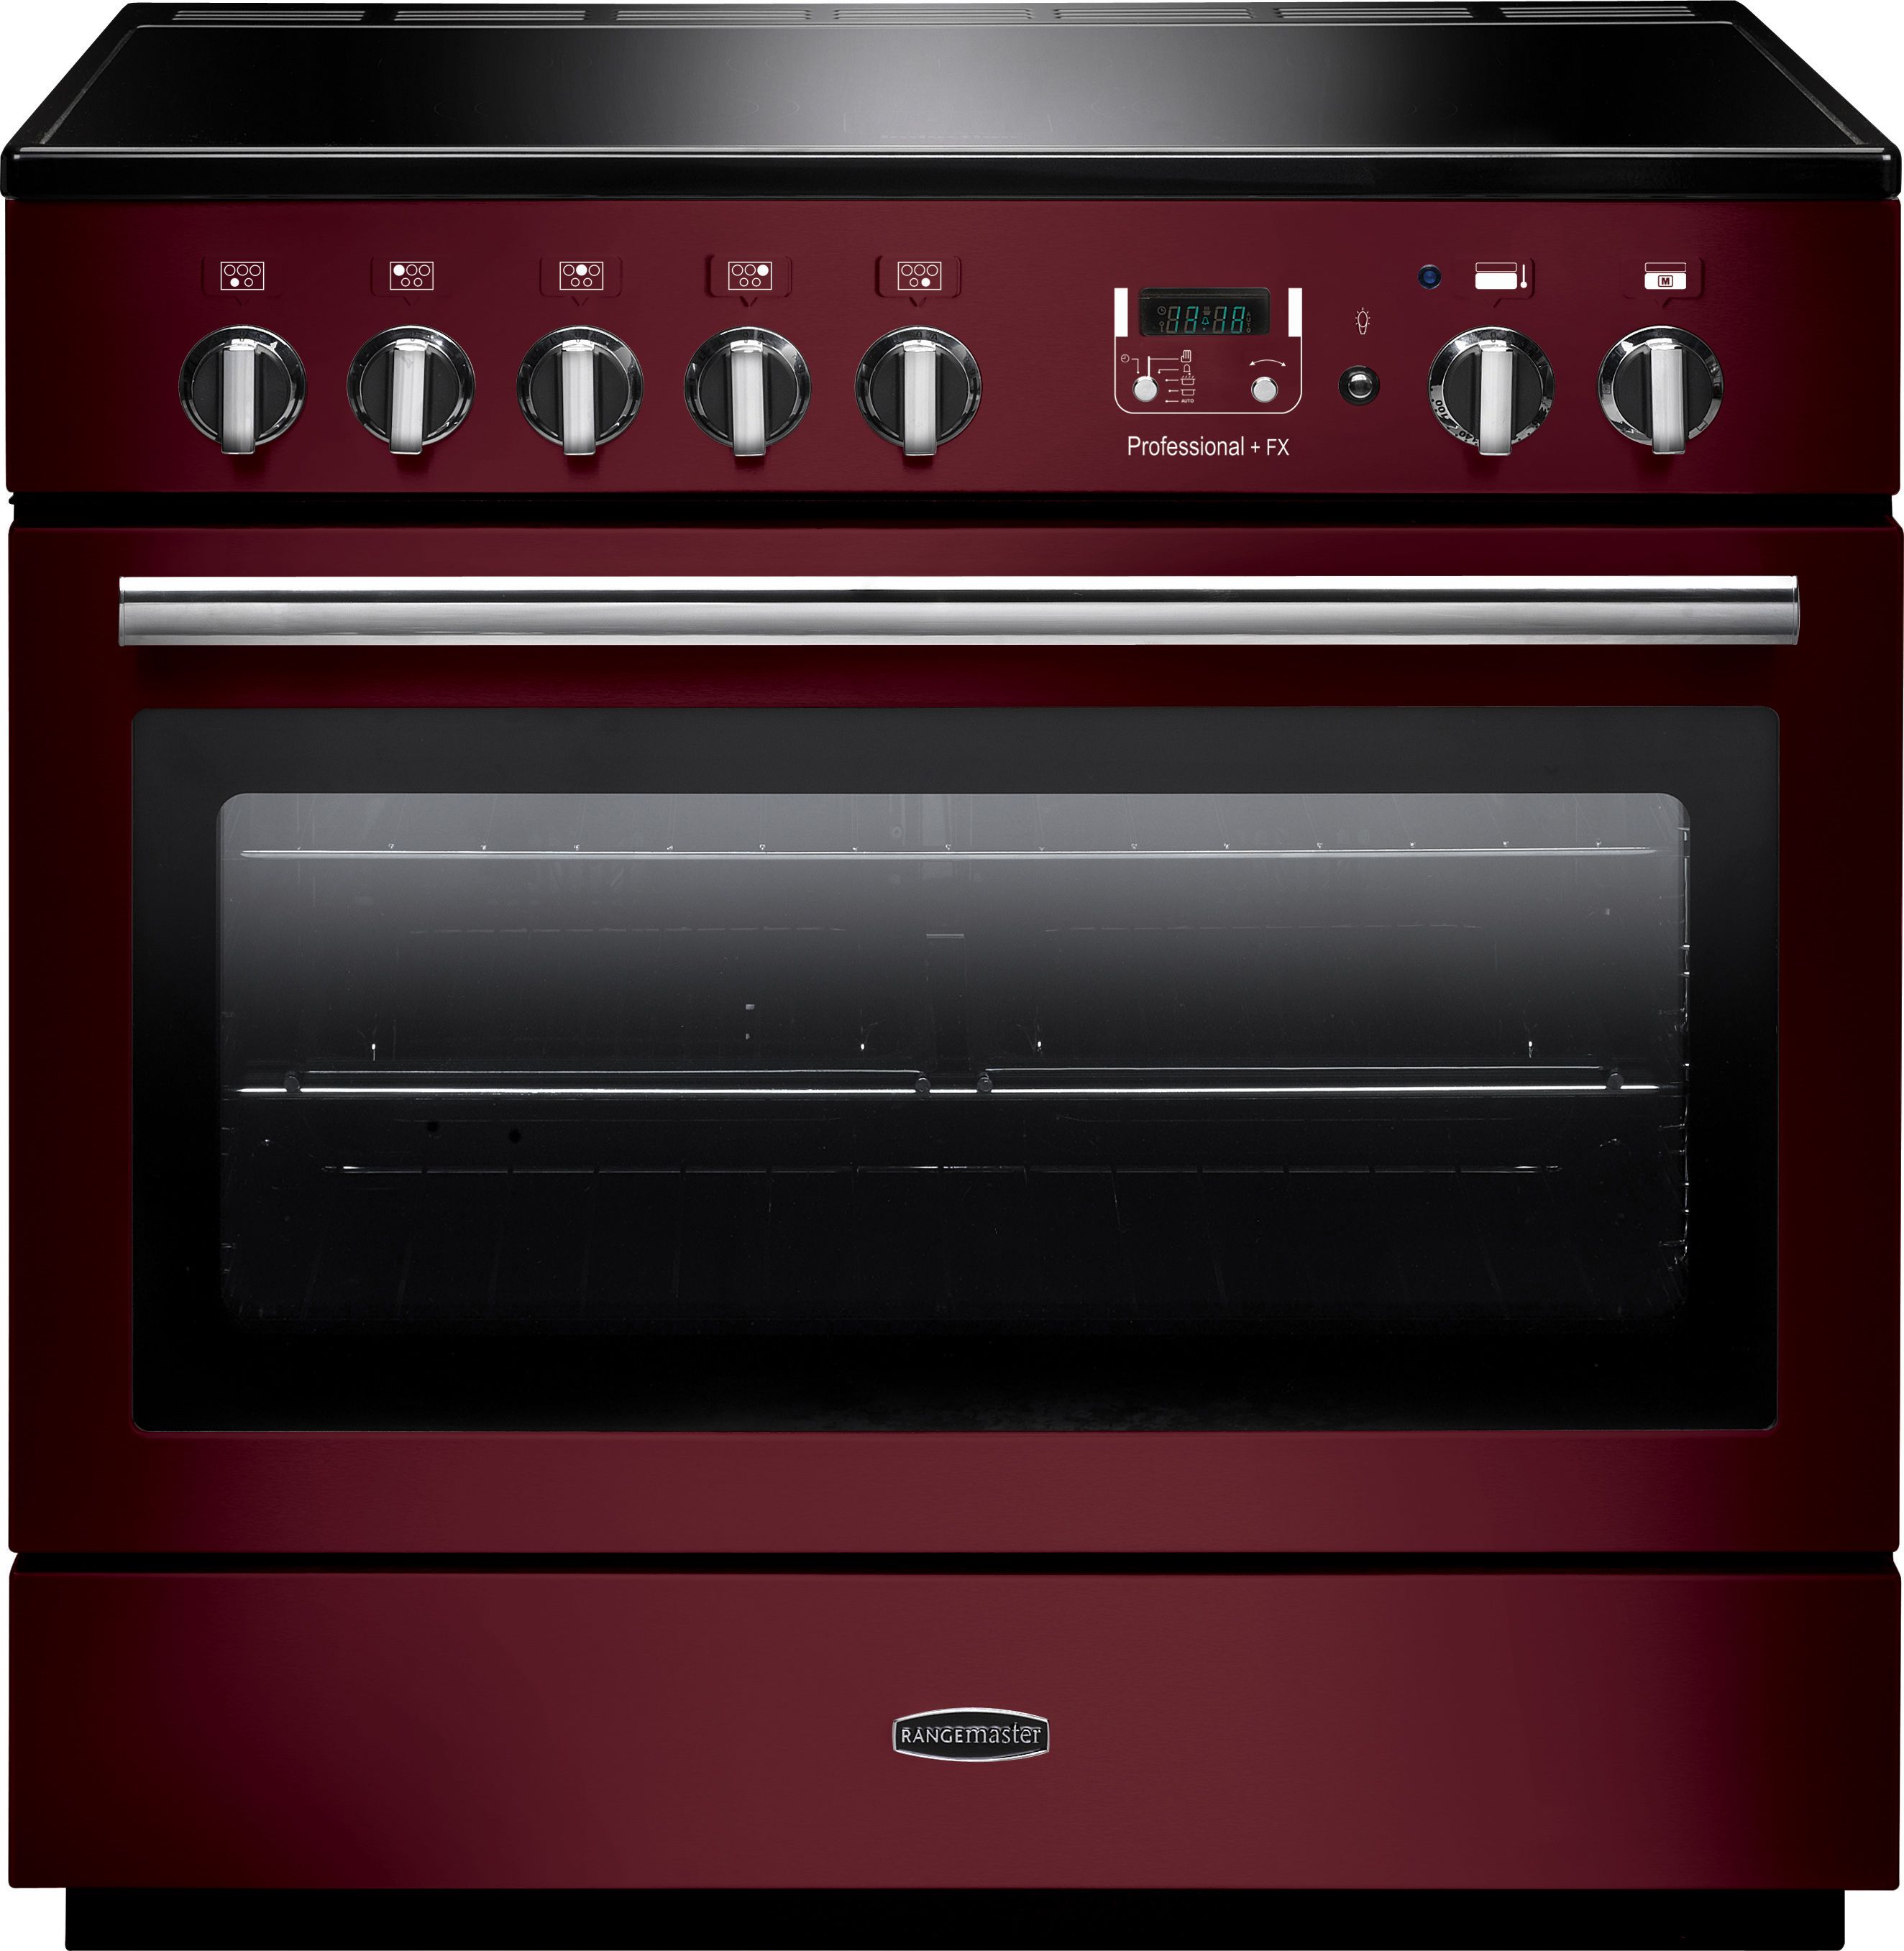 Rangemaster Professional Plus FX PROP90FXEICY/C 90cm Electric Range Cooker with Induction Hob - Cranberry - A Rated, Red